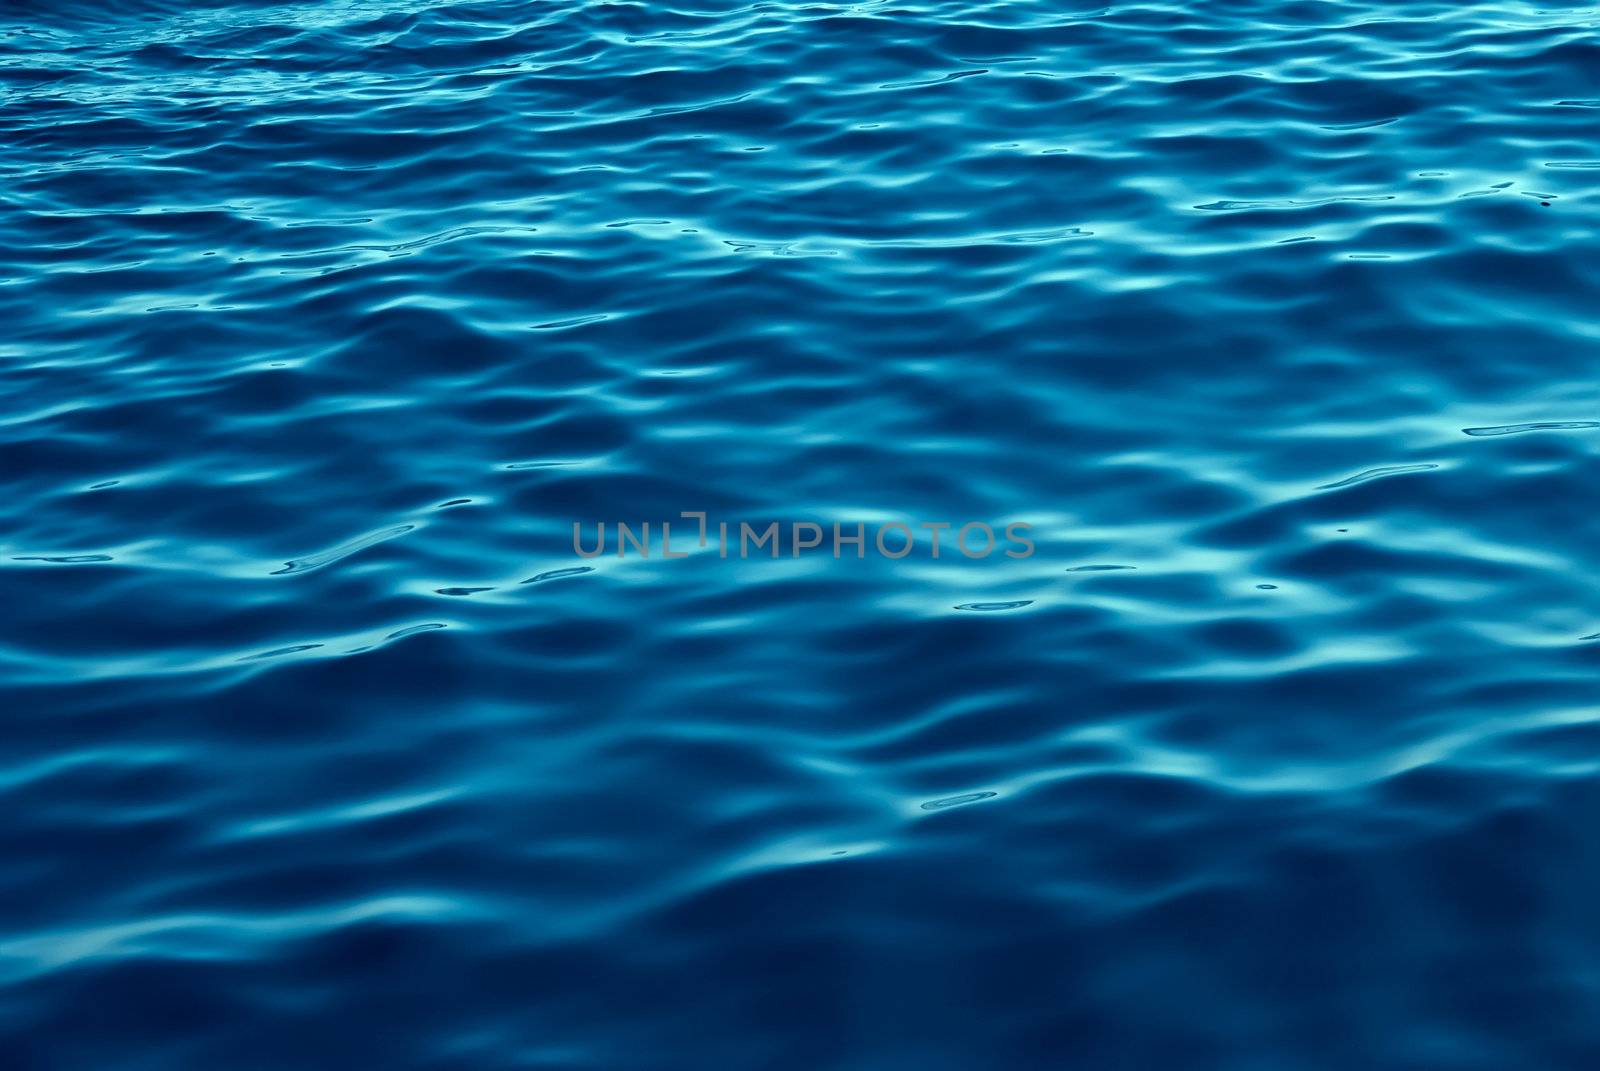 Blue Tones Water Waves Background by kirs-ua